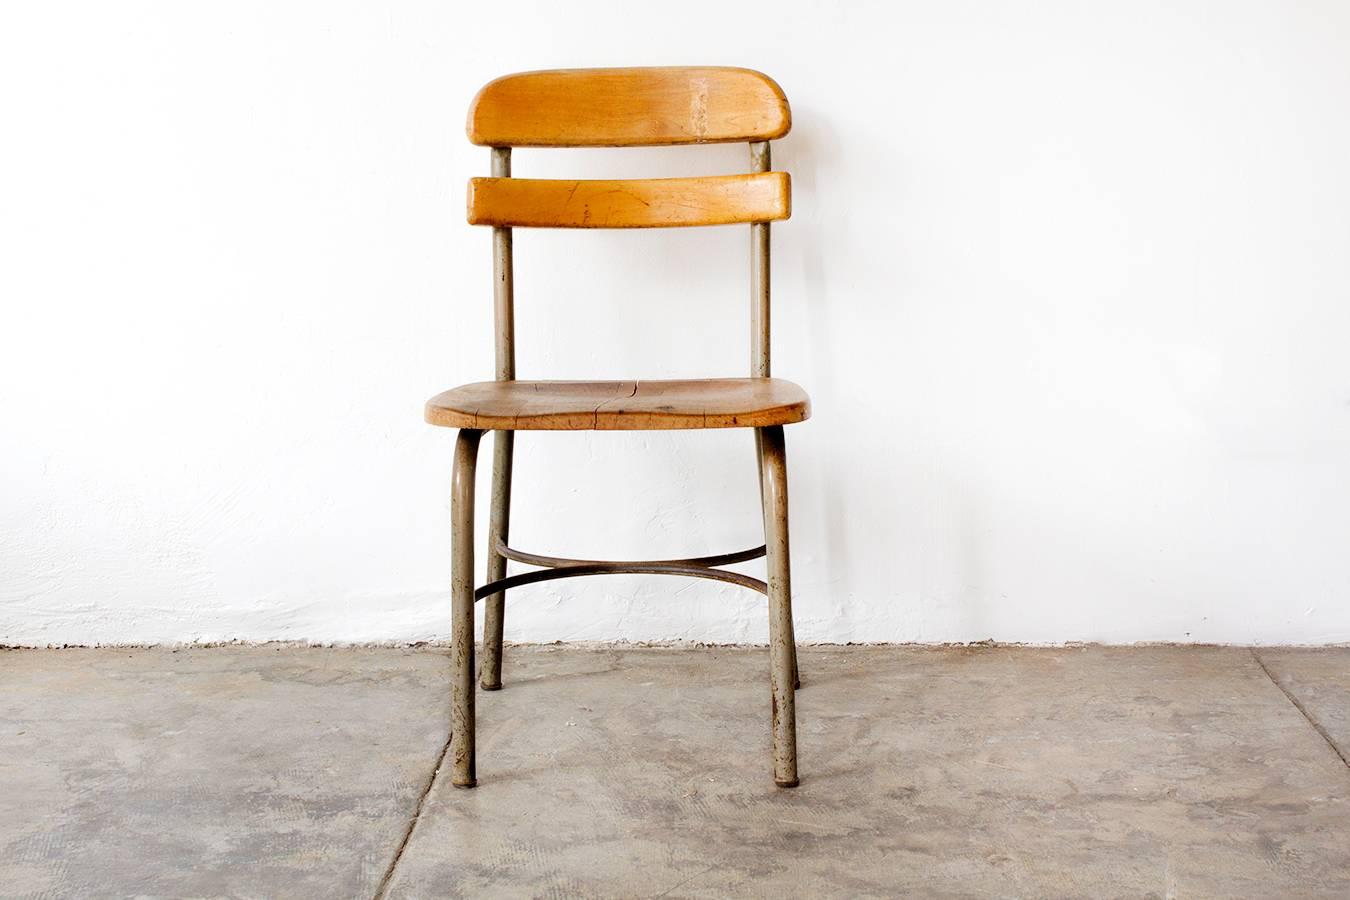 Uncommon 1950s child's school chair composed of heavy gauge tube steel frame and wood seat. The wood slat back and semicircle book rest make this piece a winner. Both steel and wood show original vintage patina. Wood has been gently reconditioned.